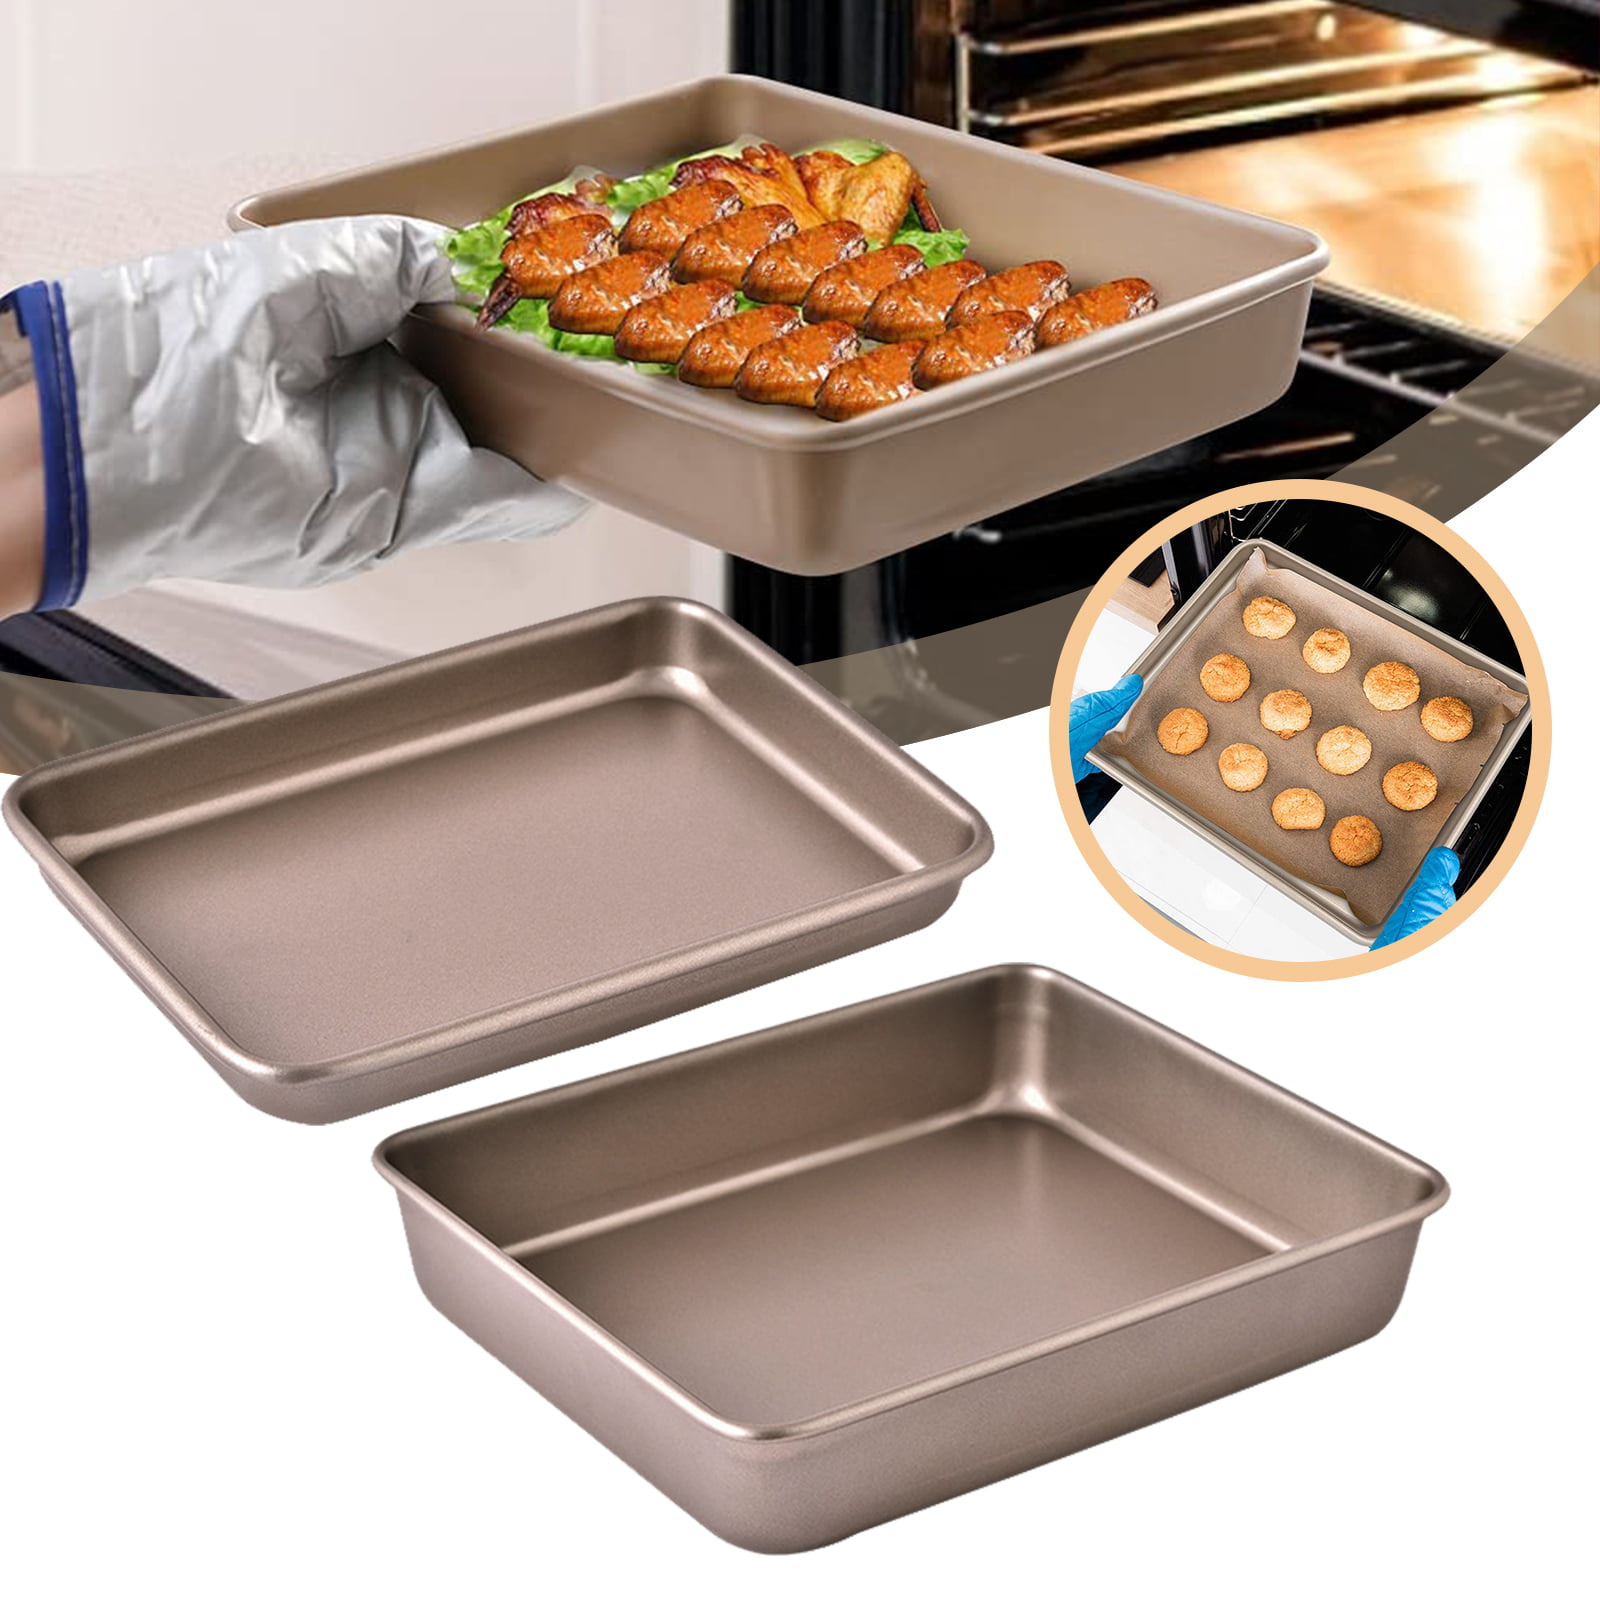 AtrauX Baking Cookie Sheet Pan Serving Tray Professional Baking Sheet for  oven Nonstick 15.3Lx11.5Wx2.0H inch Gold